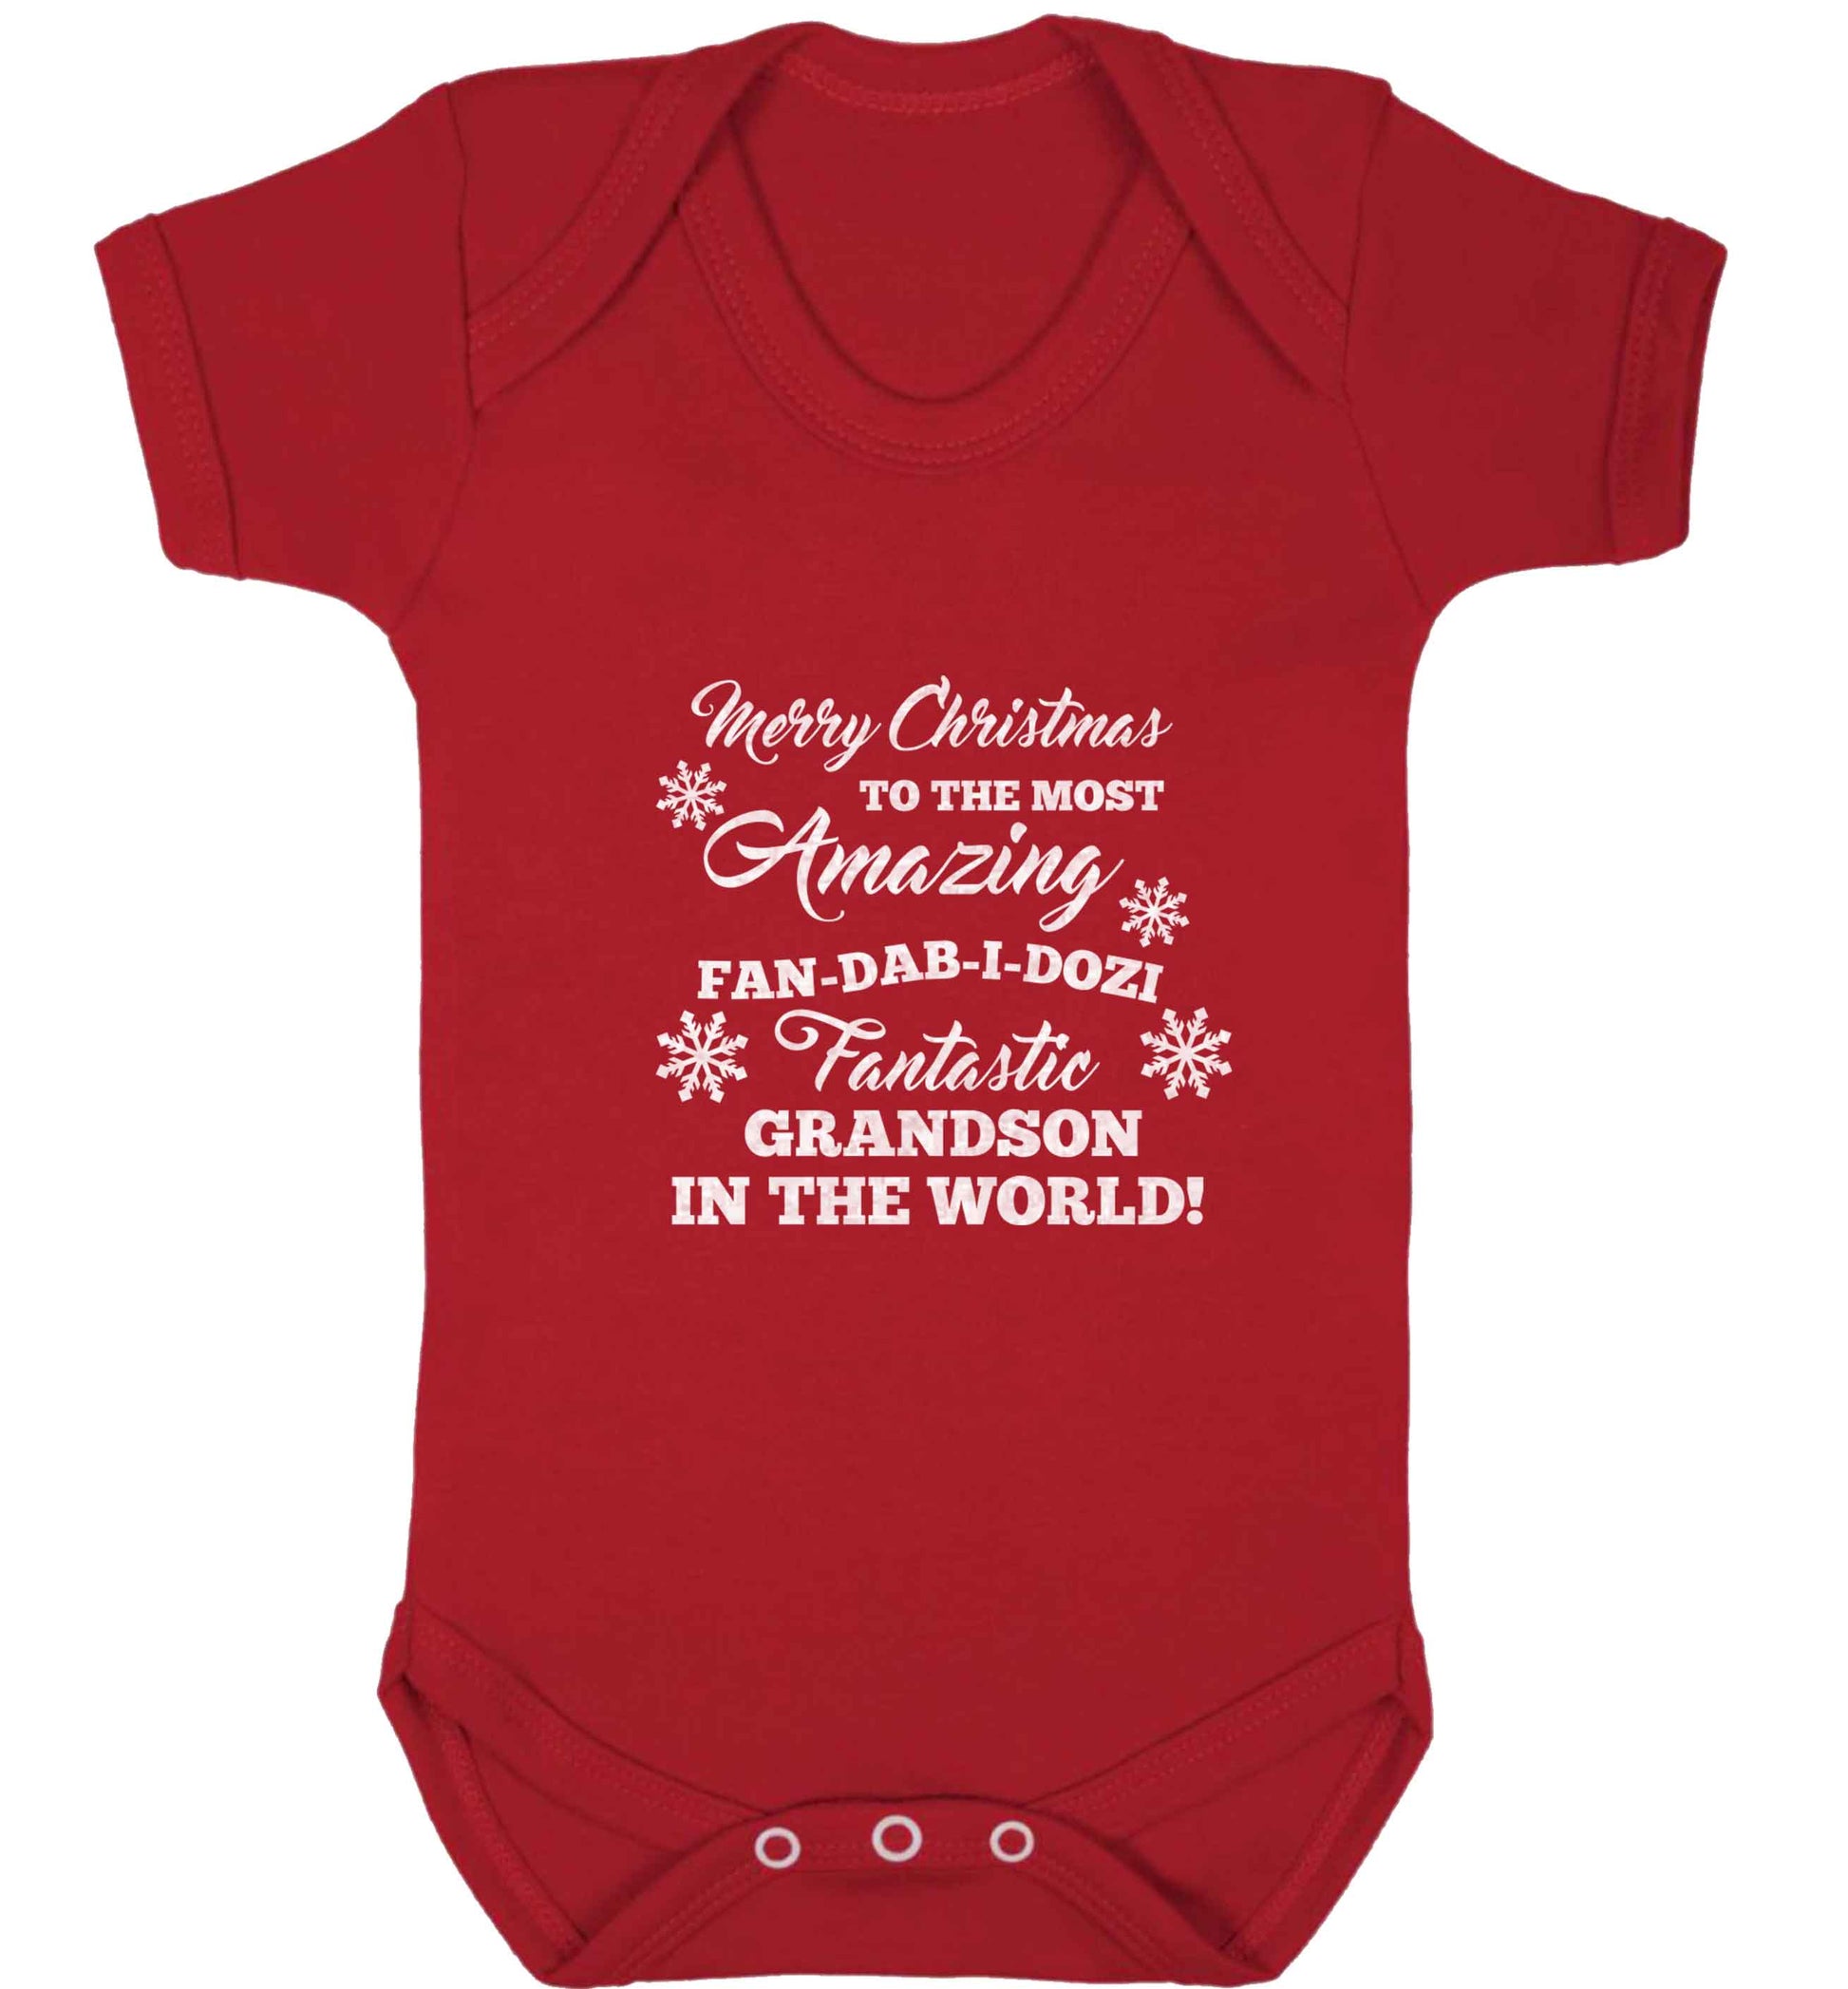 Merry Christmas to the most amazing fan-dab-i-dozi fantasic Grandson in the world baby vest red 18-24 months